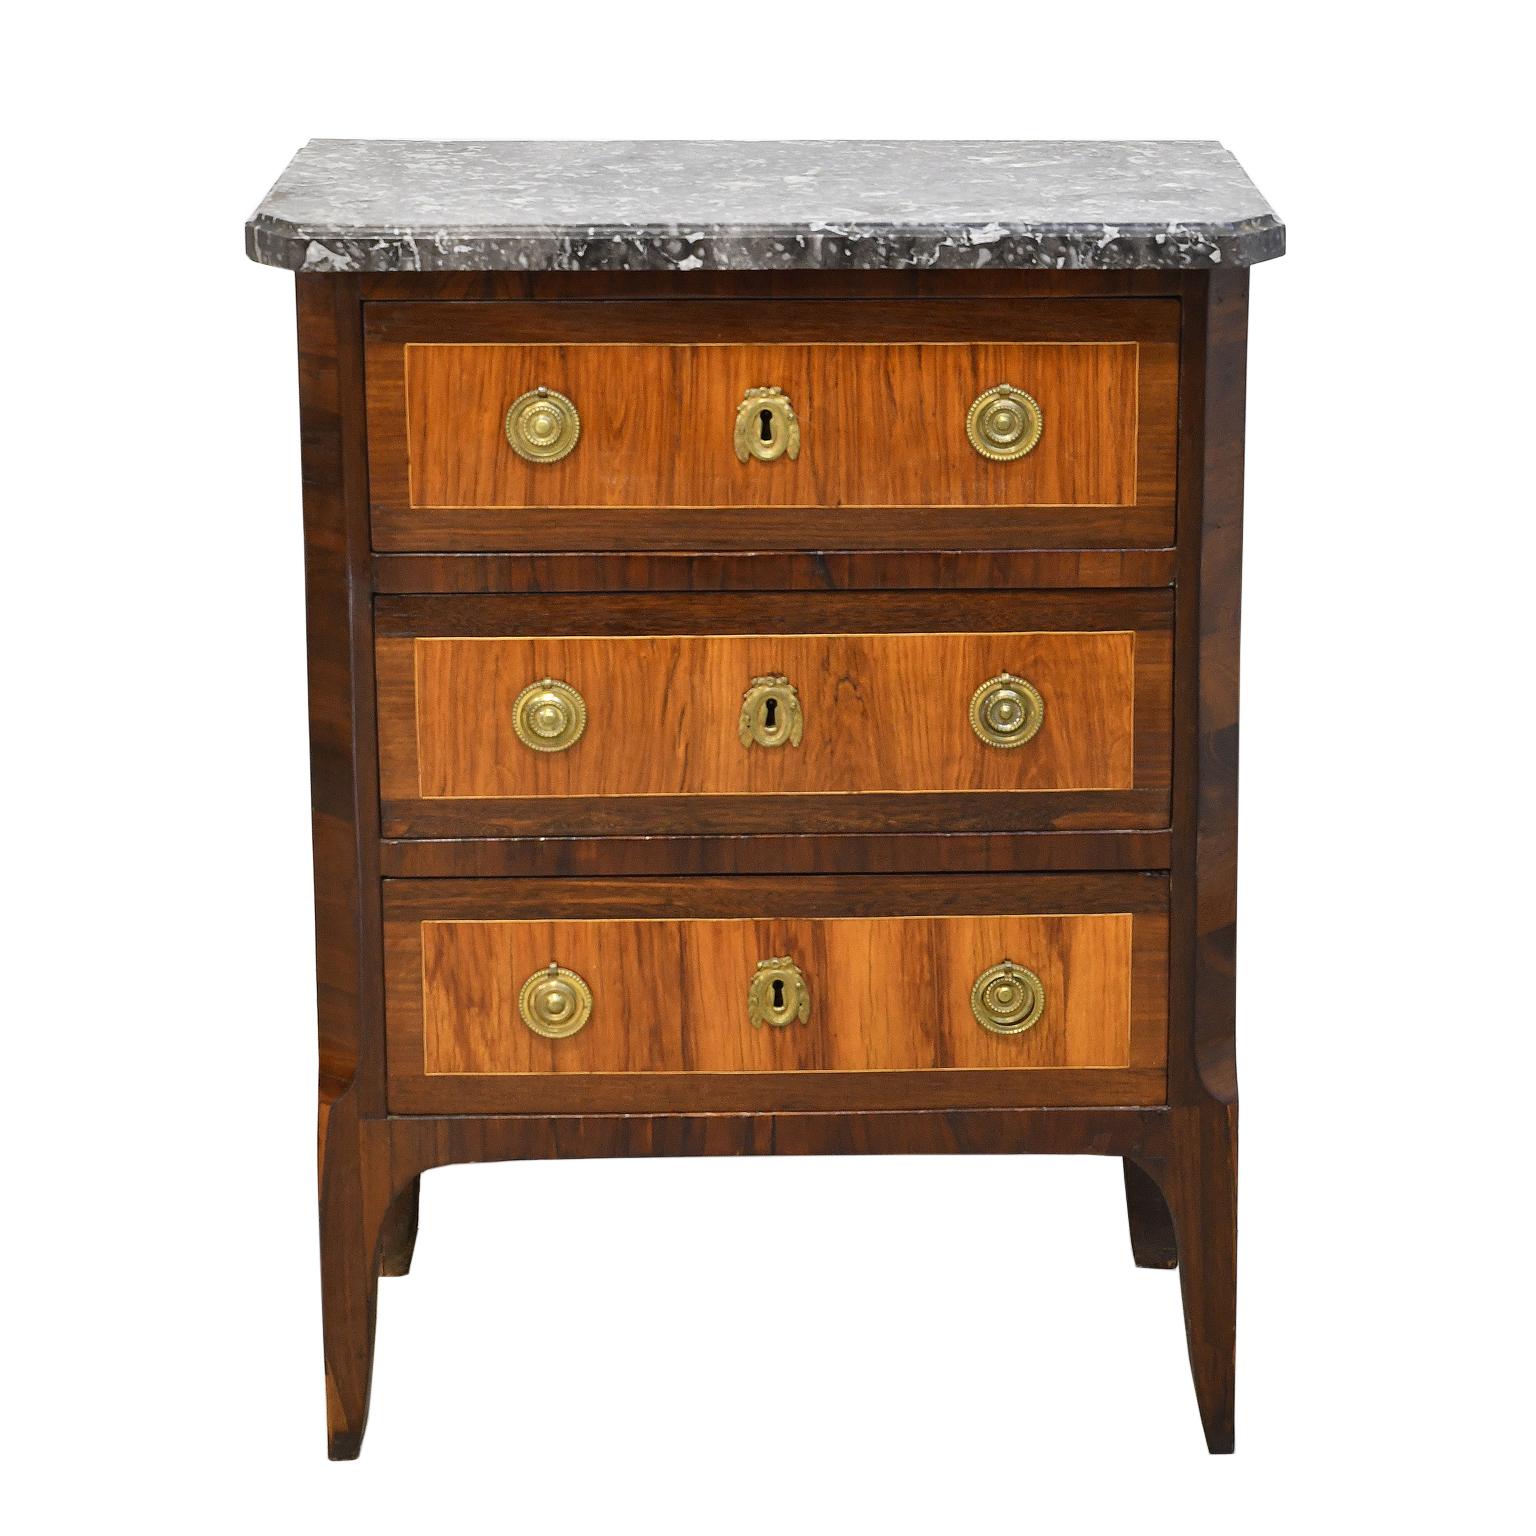 A very fine and lovely 18th century petit French commode in the Directoire style in rosewood and amaranth (purpleheart wood) with original black and white marble top. Chest rests on splayed legs and offers three drawers with original bronze d'ore